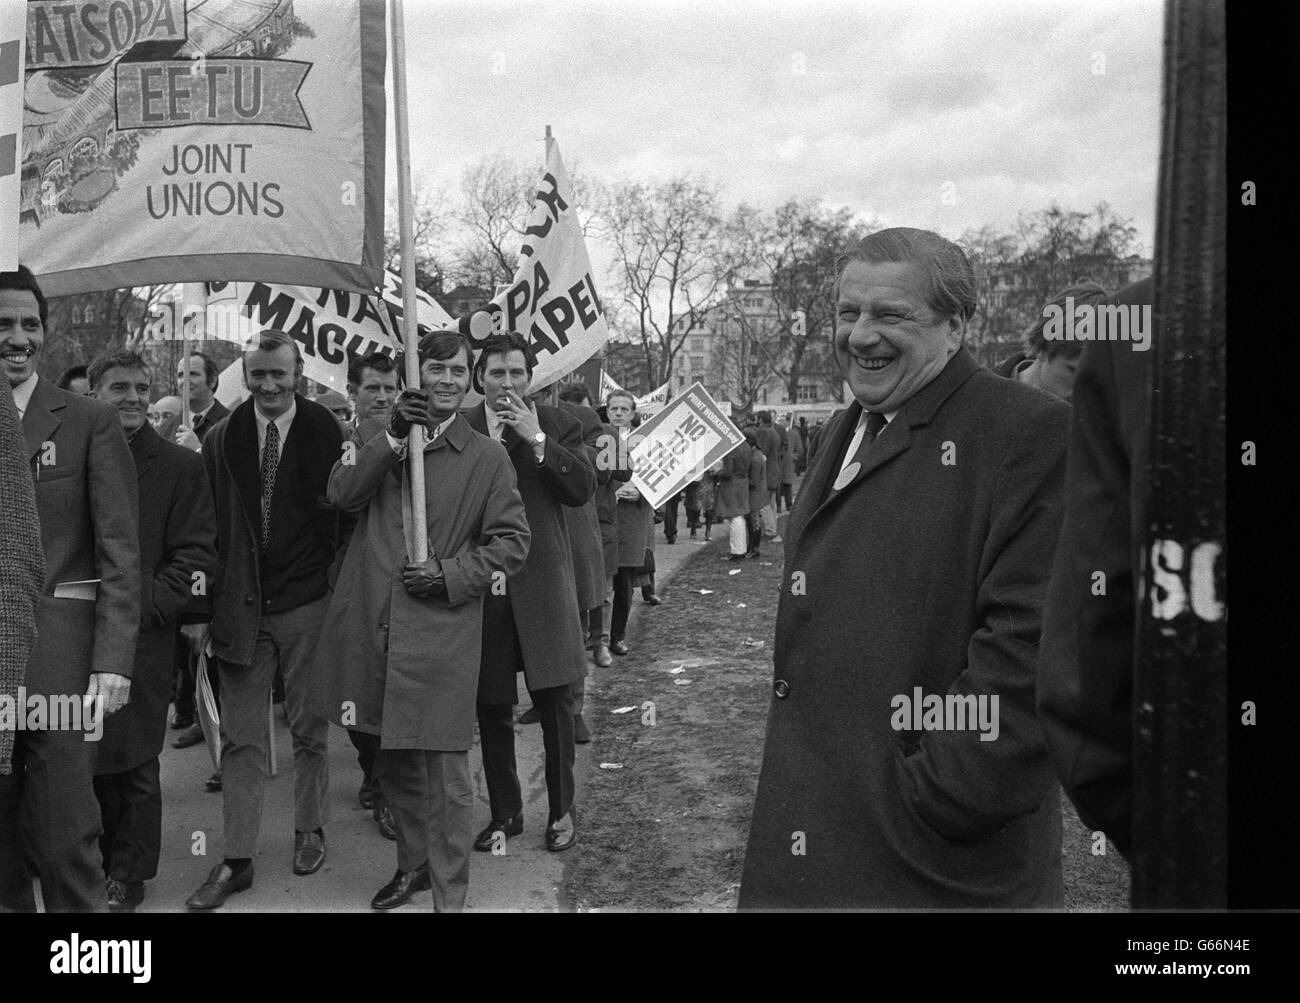 Sunny smiles on a serious occasion for TUC General Secretary Mr Vic Feather and Trade Union demonstrators as they started off a march from Speaker's Corner Hyde Park to Trafalgar Square in an organised an ddsciplined parade against the Government's Industrial Relations Bill. Stock Photo